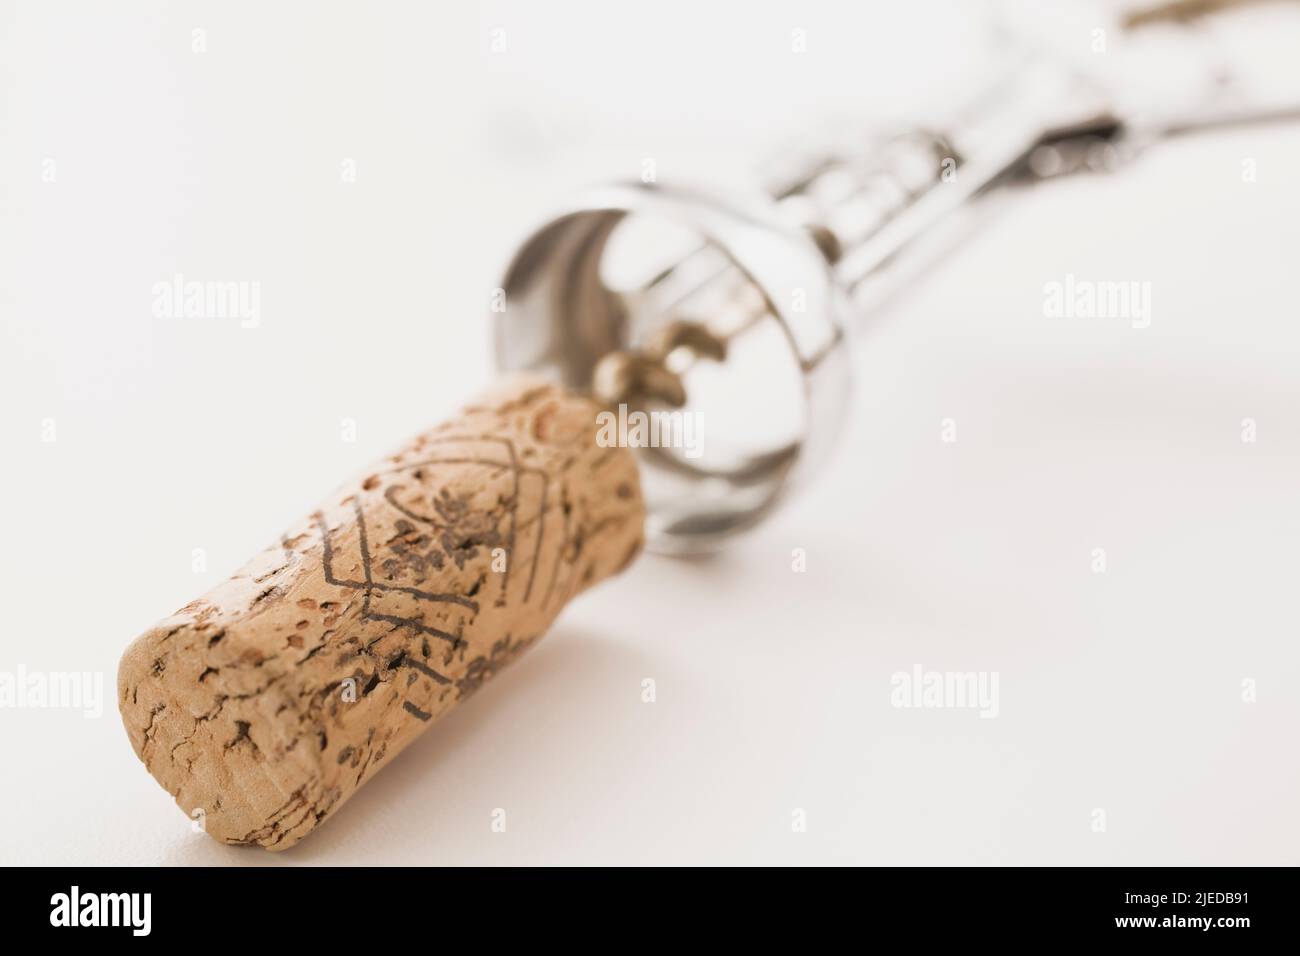 Close-up of wine bottle cork and corkscrew on white background. Stock Photo